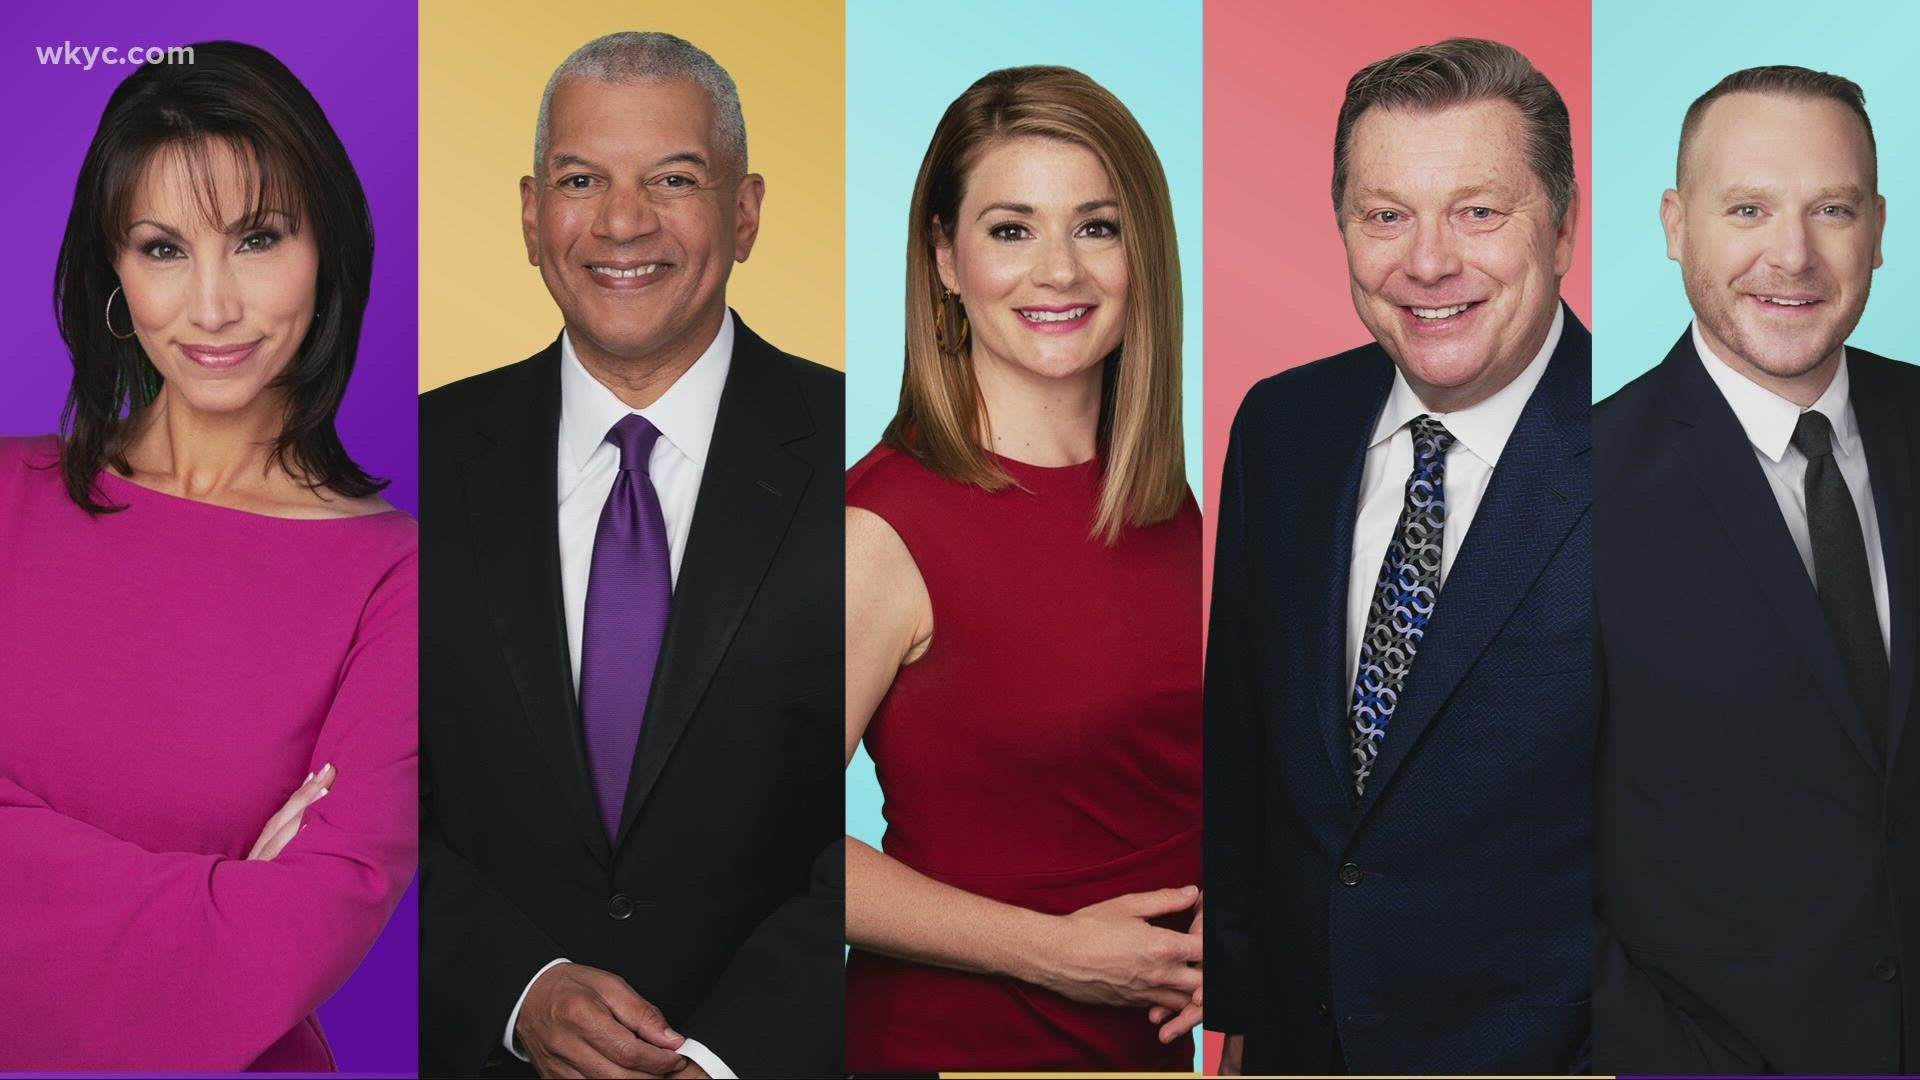 3News was honored for Best Local Newscast. Several of our on-air personalities were recognized as well.